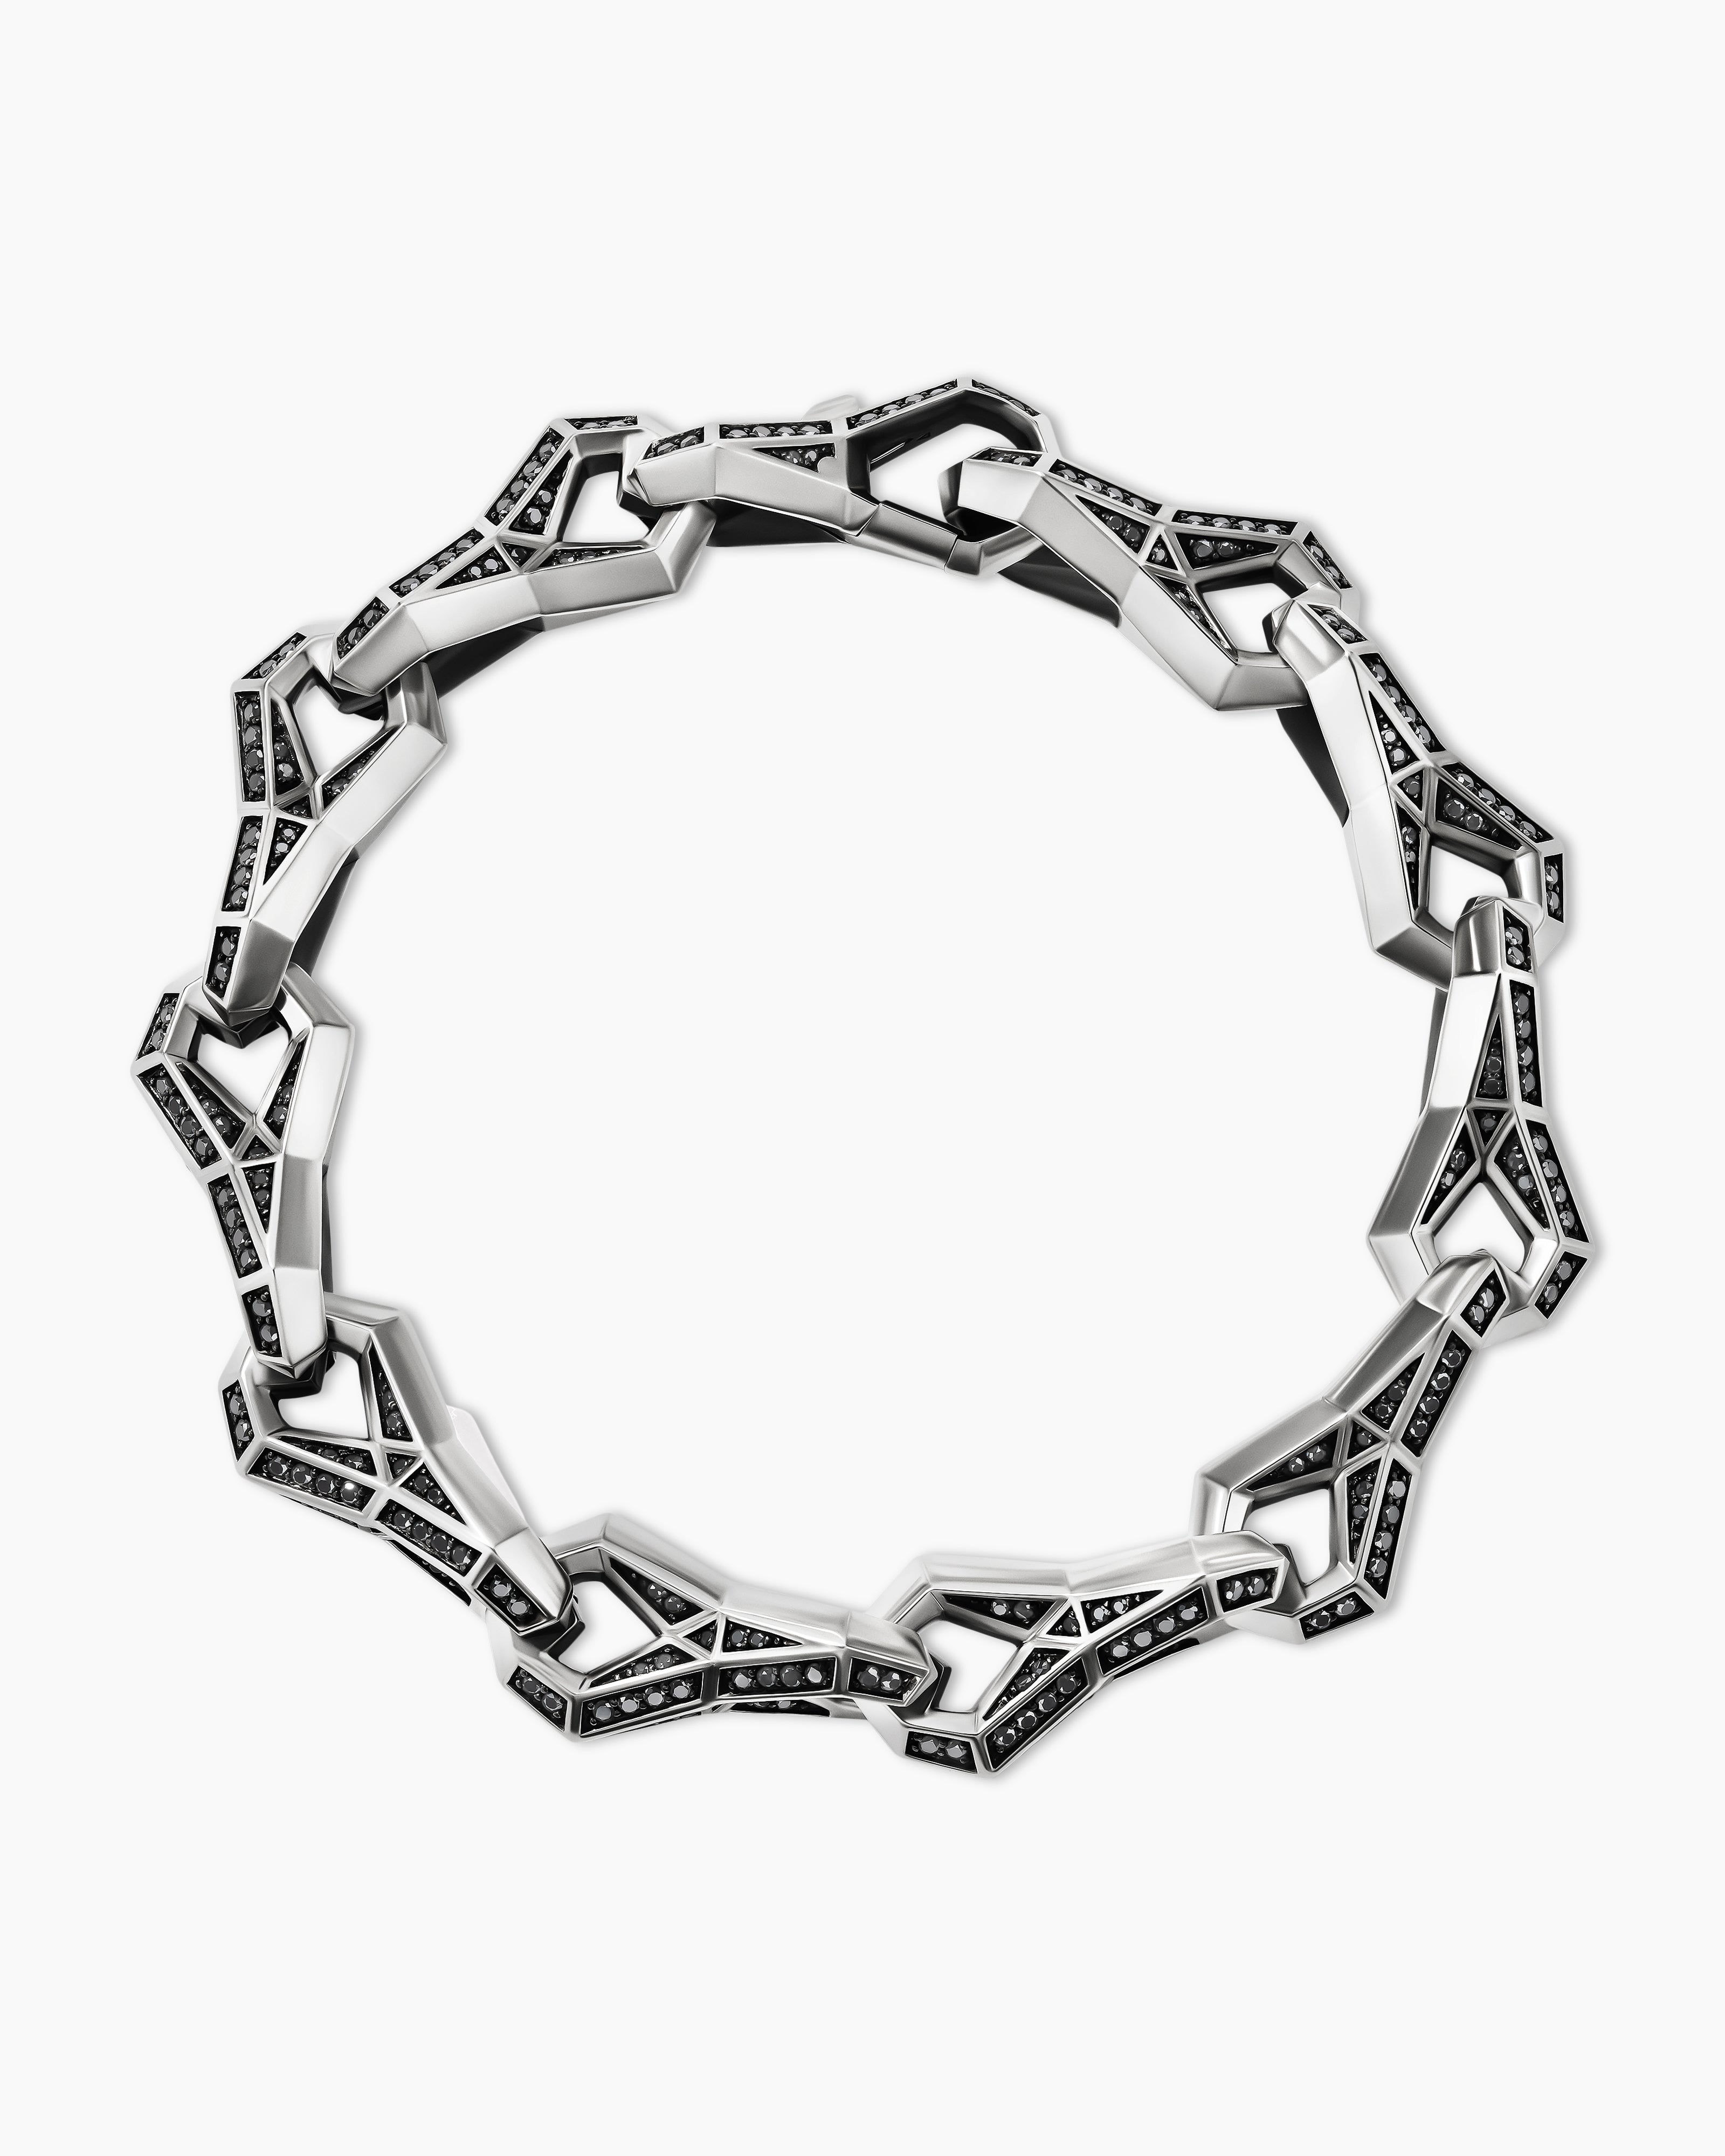 Faceted Link Bracelet in Sterling Silver with Black Diamonds, 12.5mm